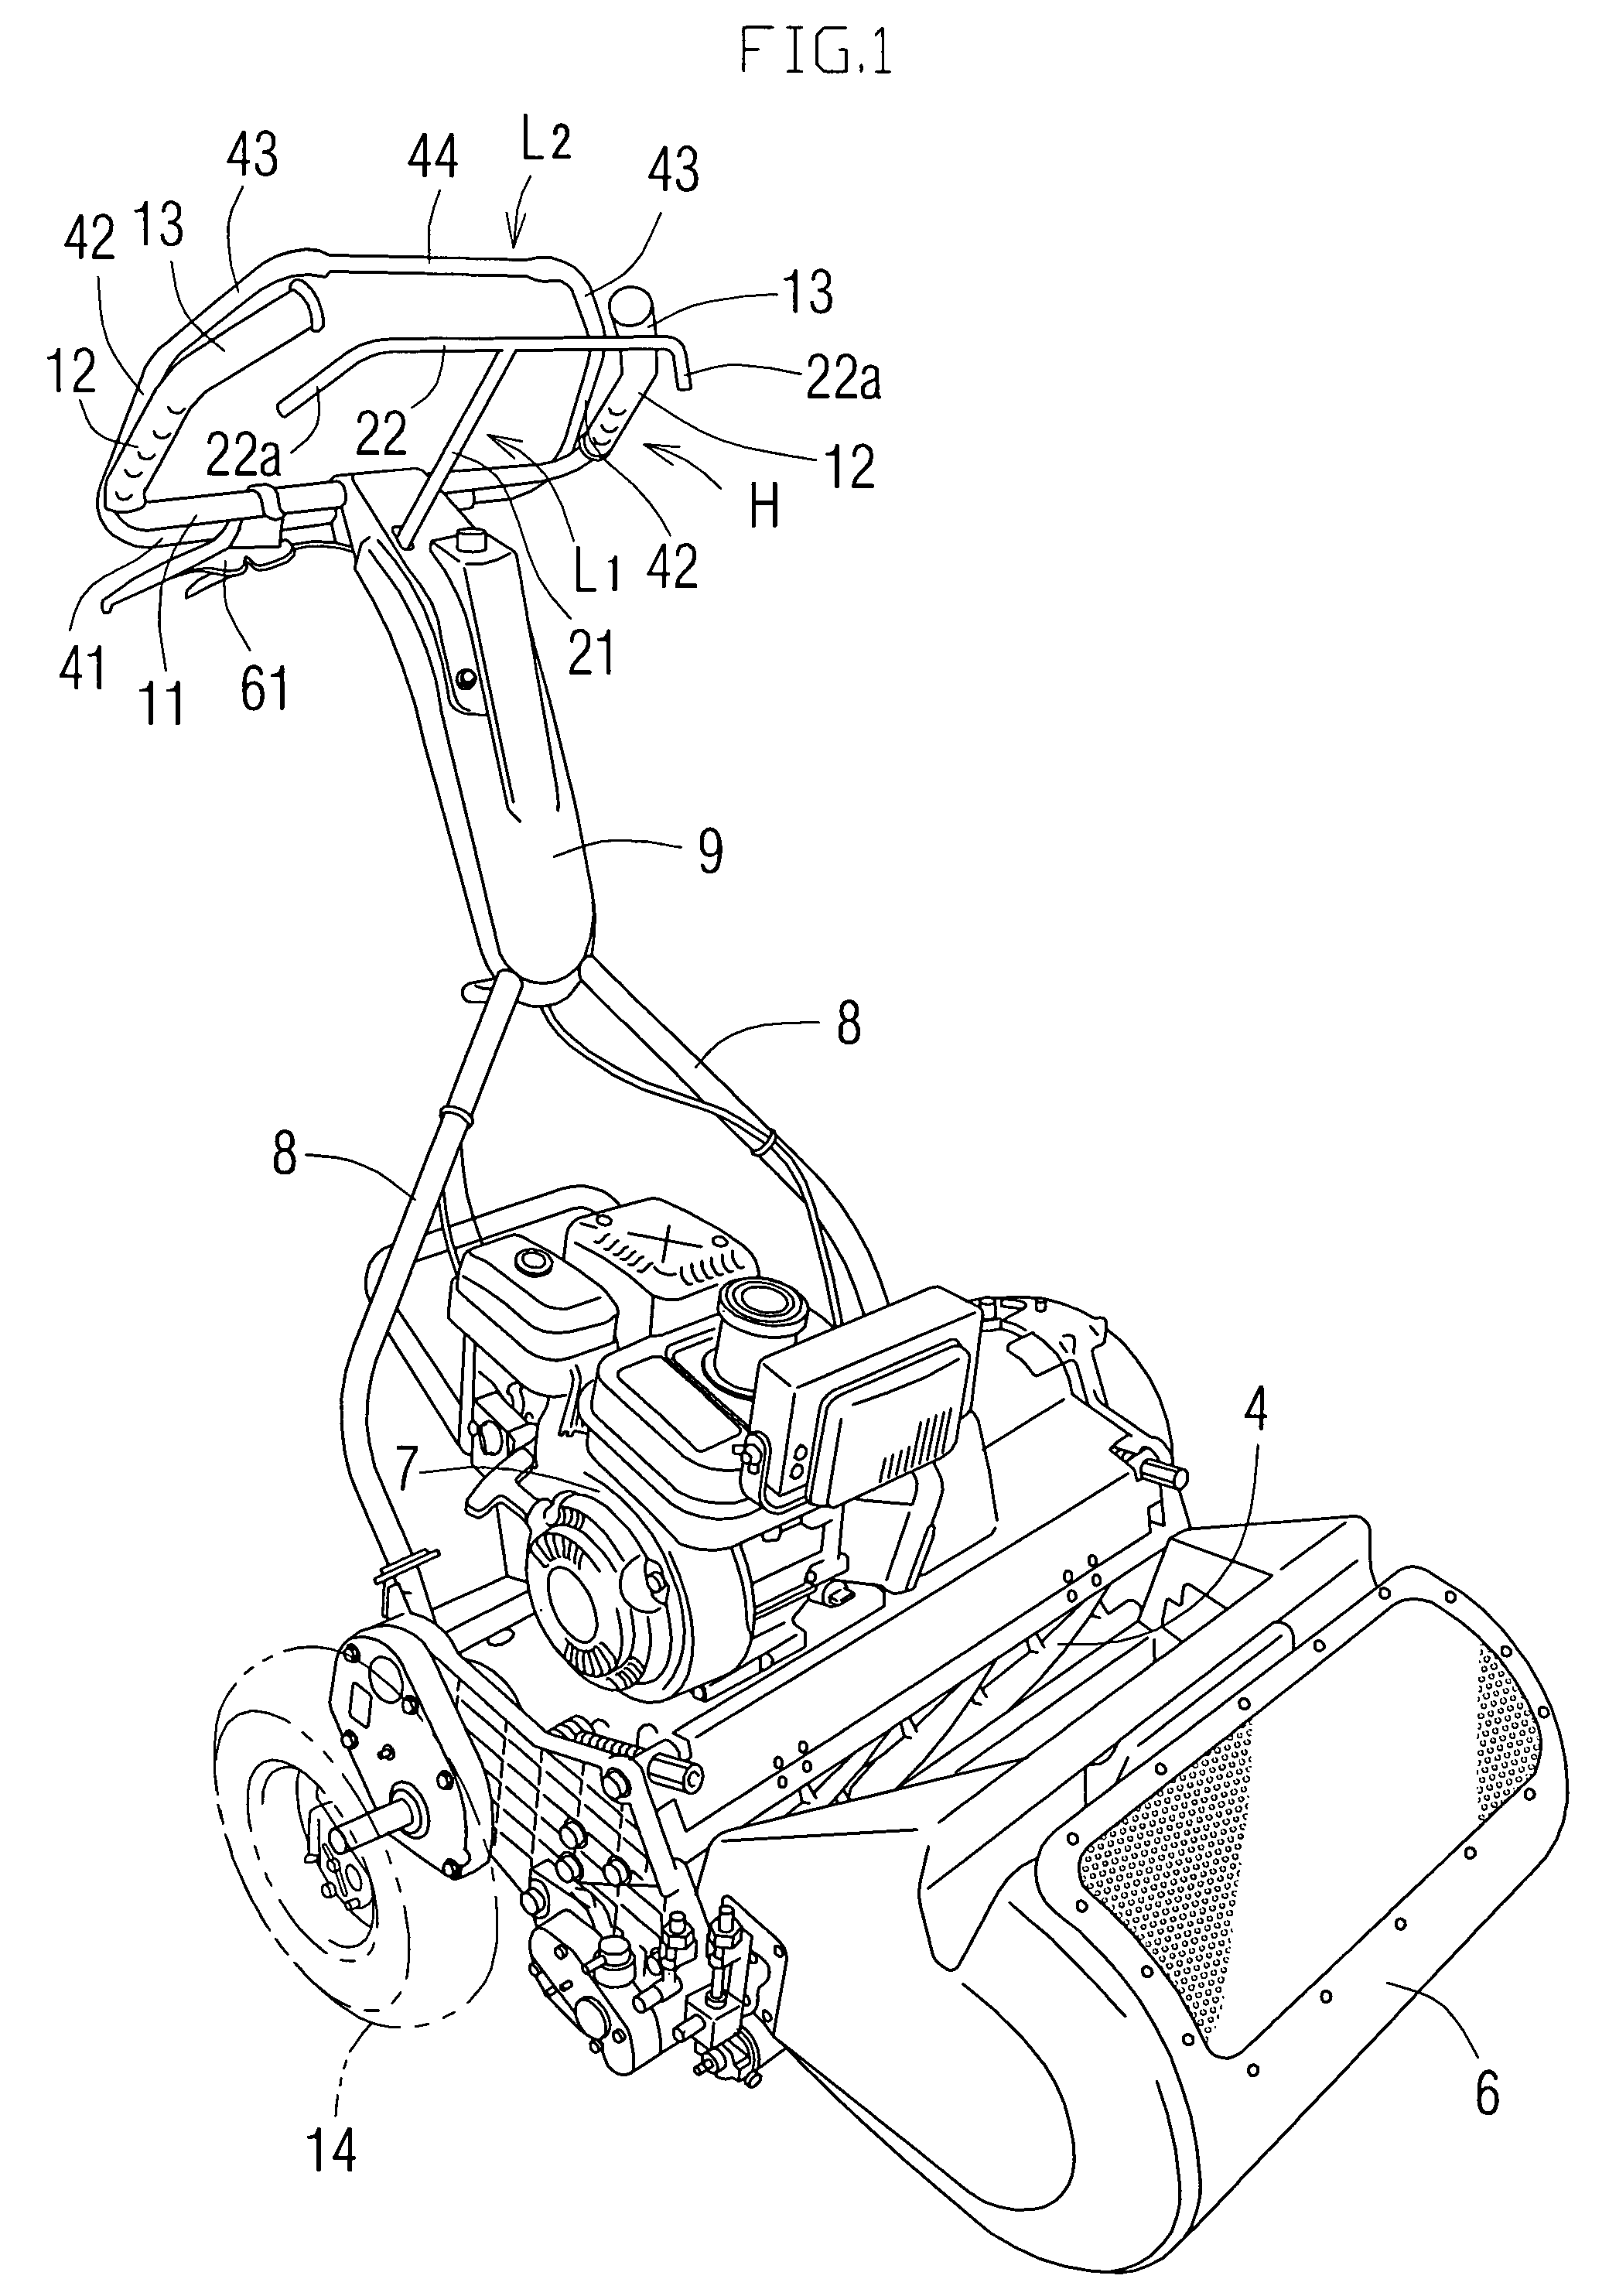 Drive operation device of walk-behind lawn mower